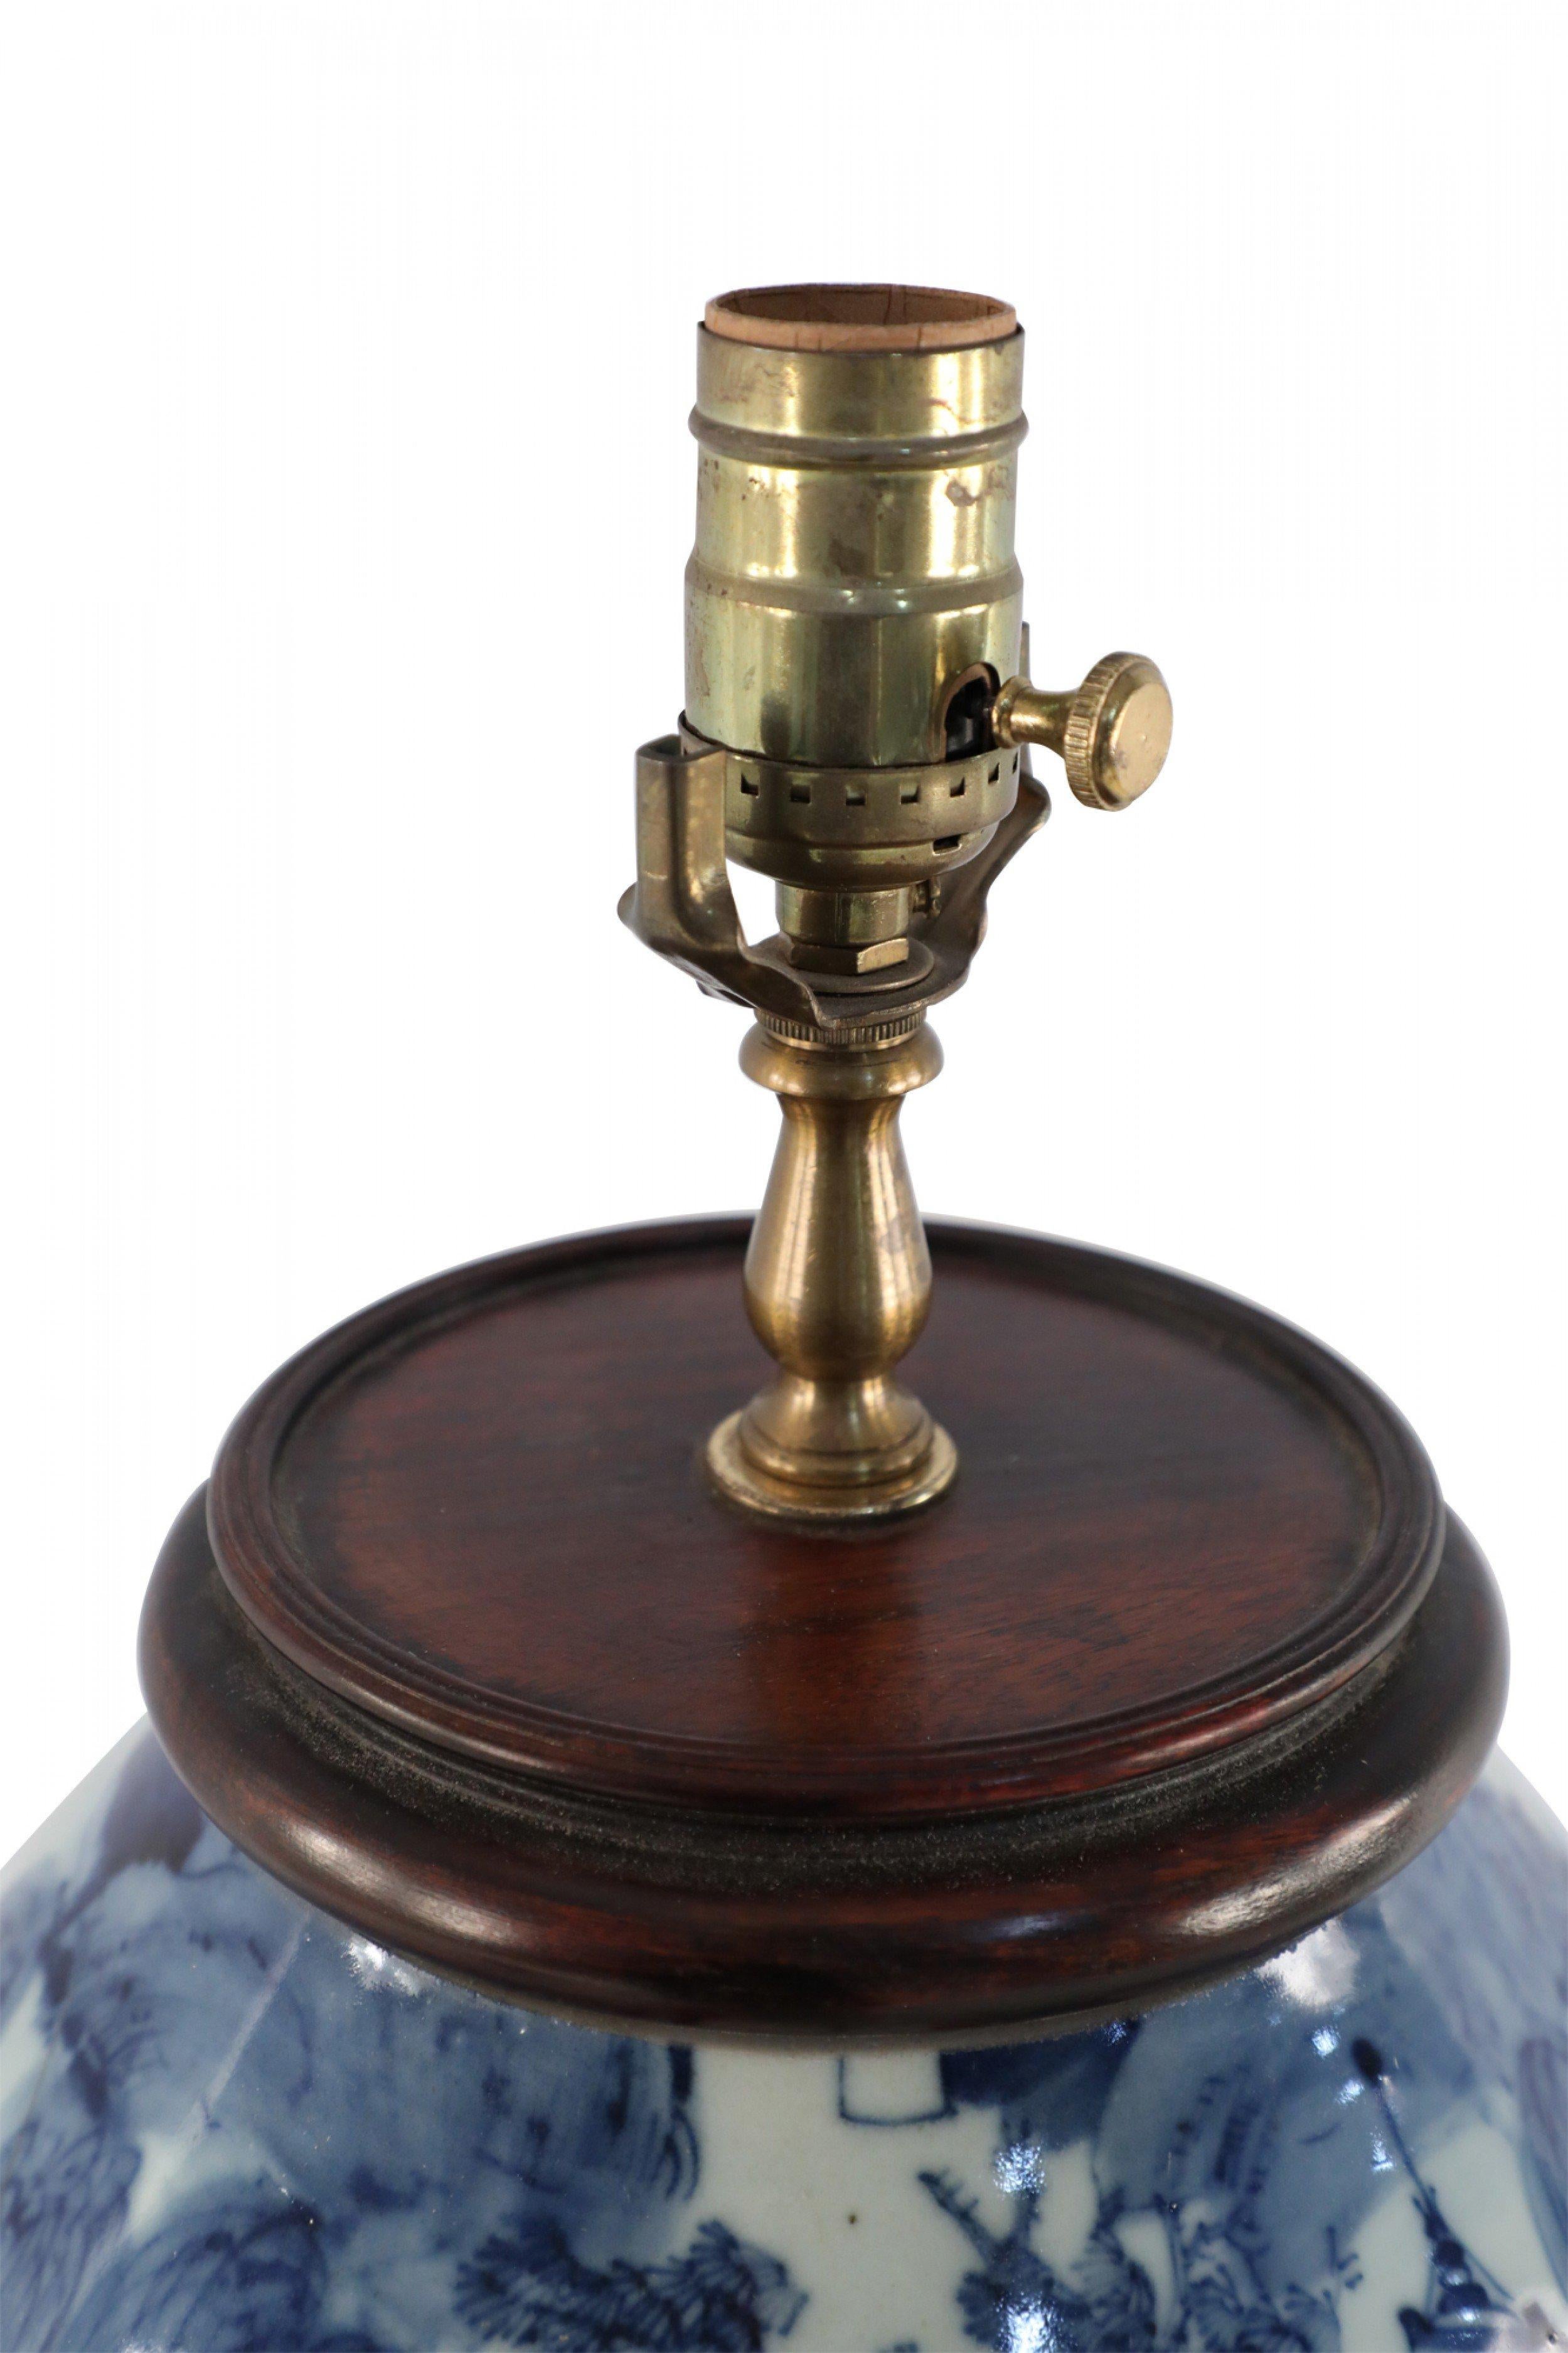 Antique Chinese (Early 20th Century) table lamp made from an off-white and blue, baluster-shaped, porcelain vase capturing a vibrant village along a river, mounted on a brown wooden base with brass hardware.
